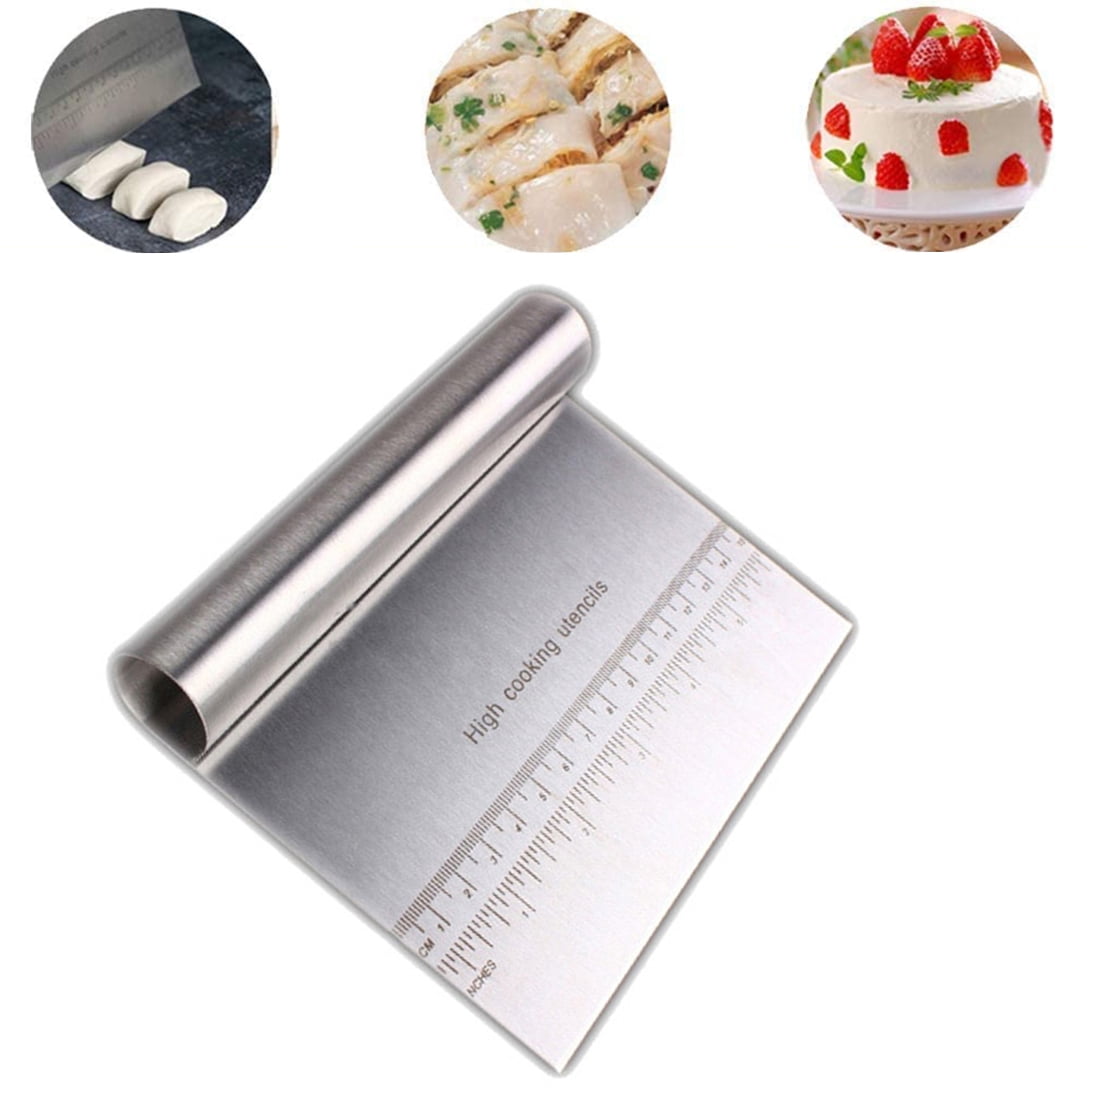 Pizza Dough Scraper Cutter Stainless Steel Flour Pastry Kitchen Cake Tool US Top